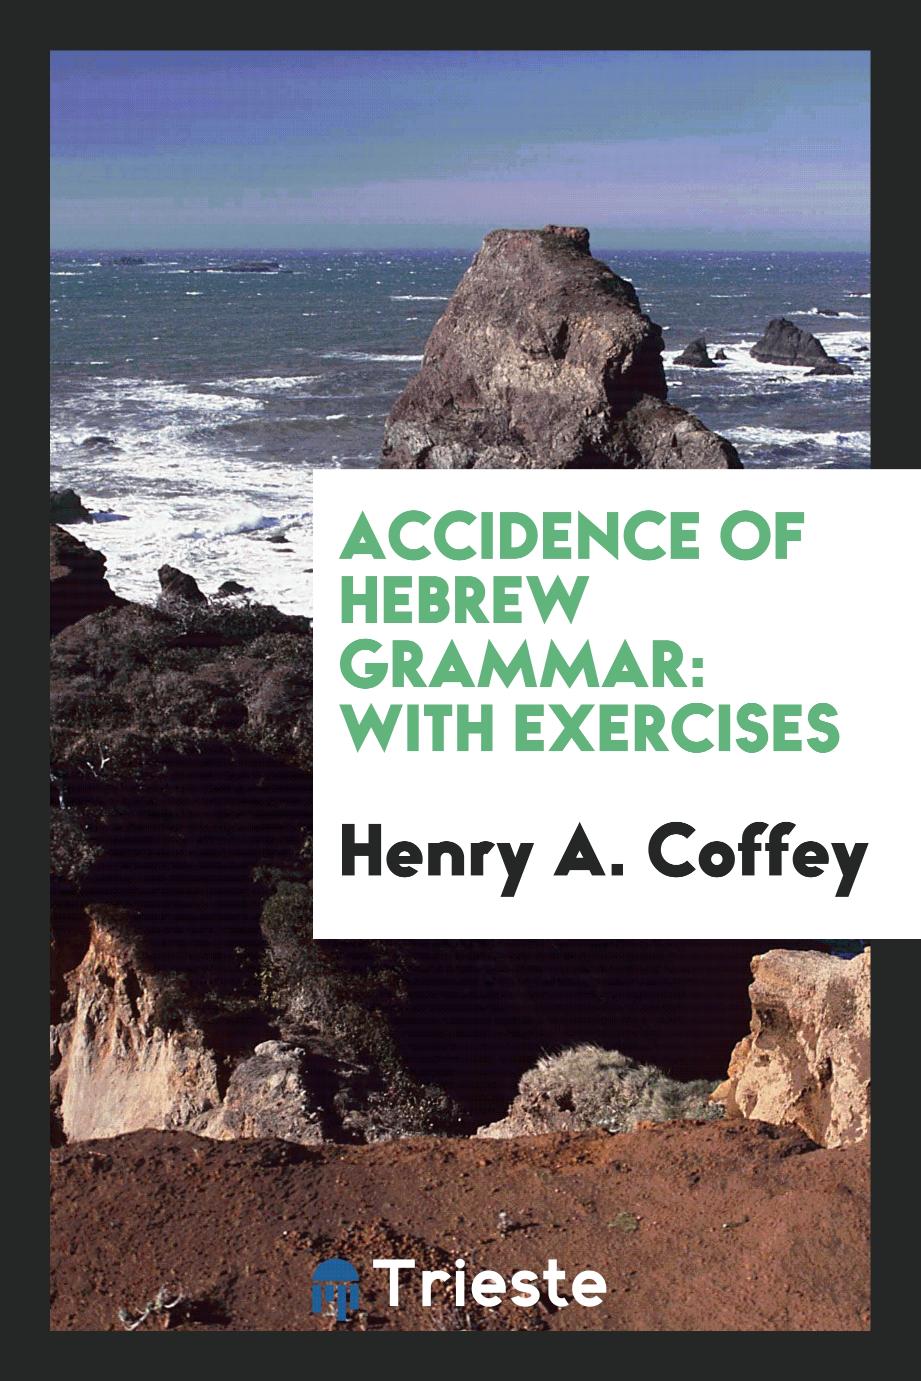 Accidence of Hebrew grammar: with exercises